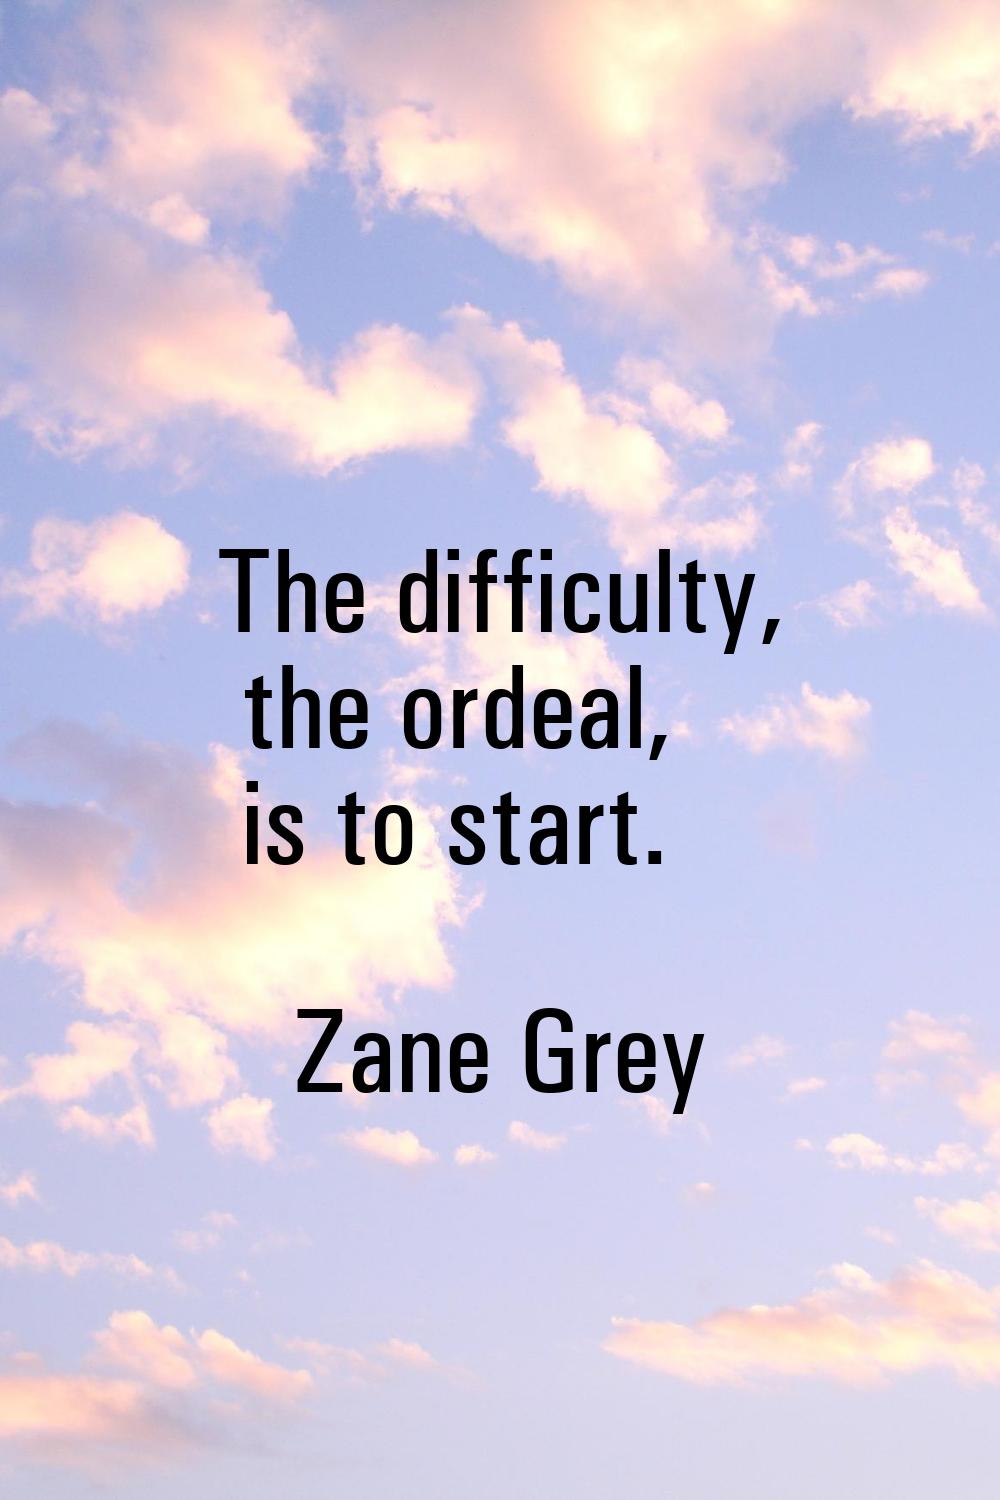 The difficulty, the ordeal, is to start.